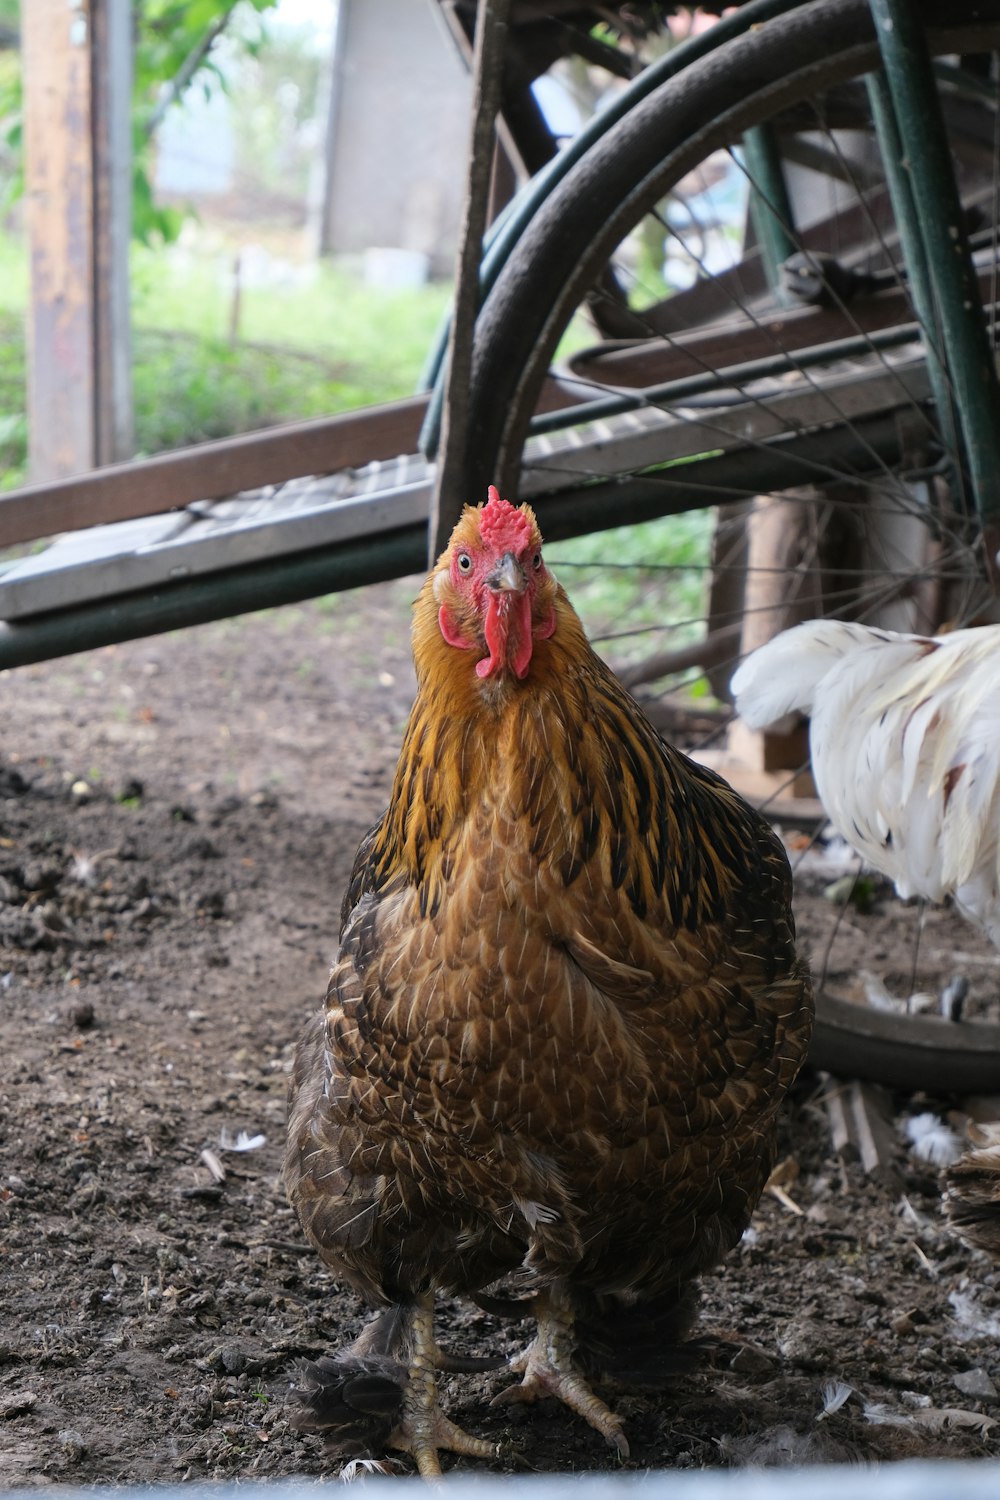 a brown and white chicken standing next to a wheel